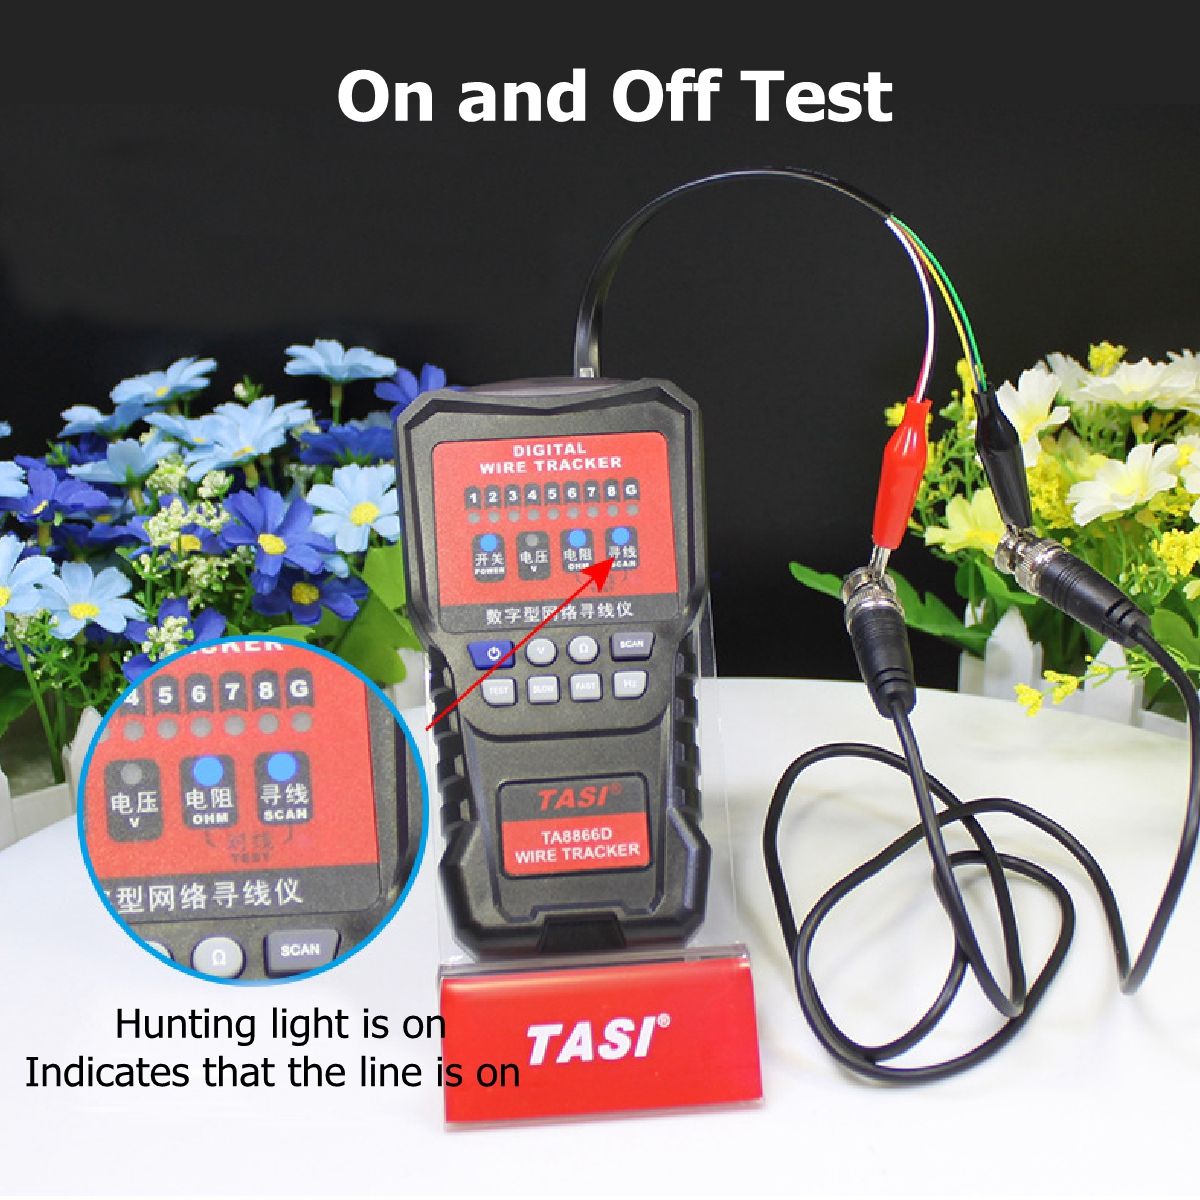 TA8866D-Multi-functions-Network-Cable-Tester-Wire-Checker-Detector-Line-Finder-1525624